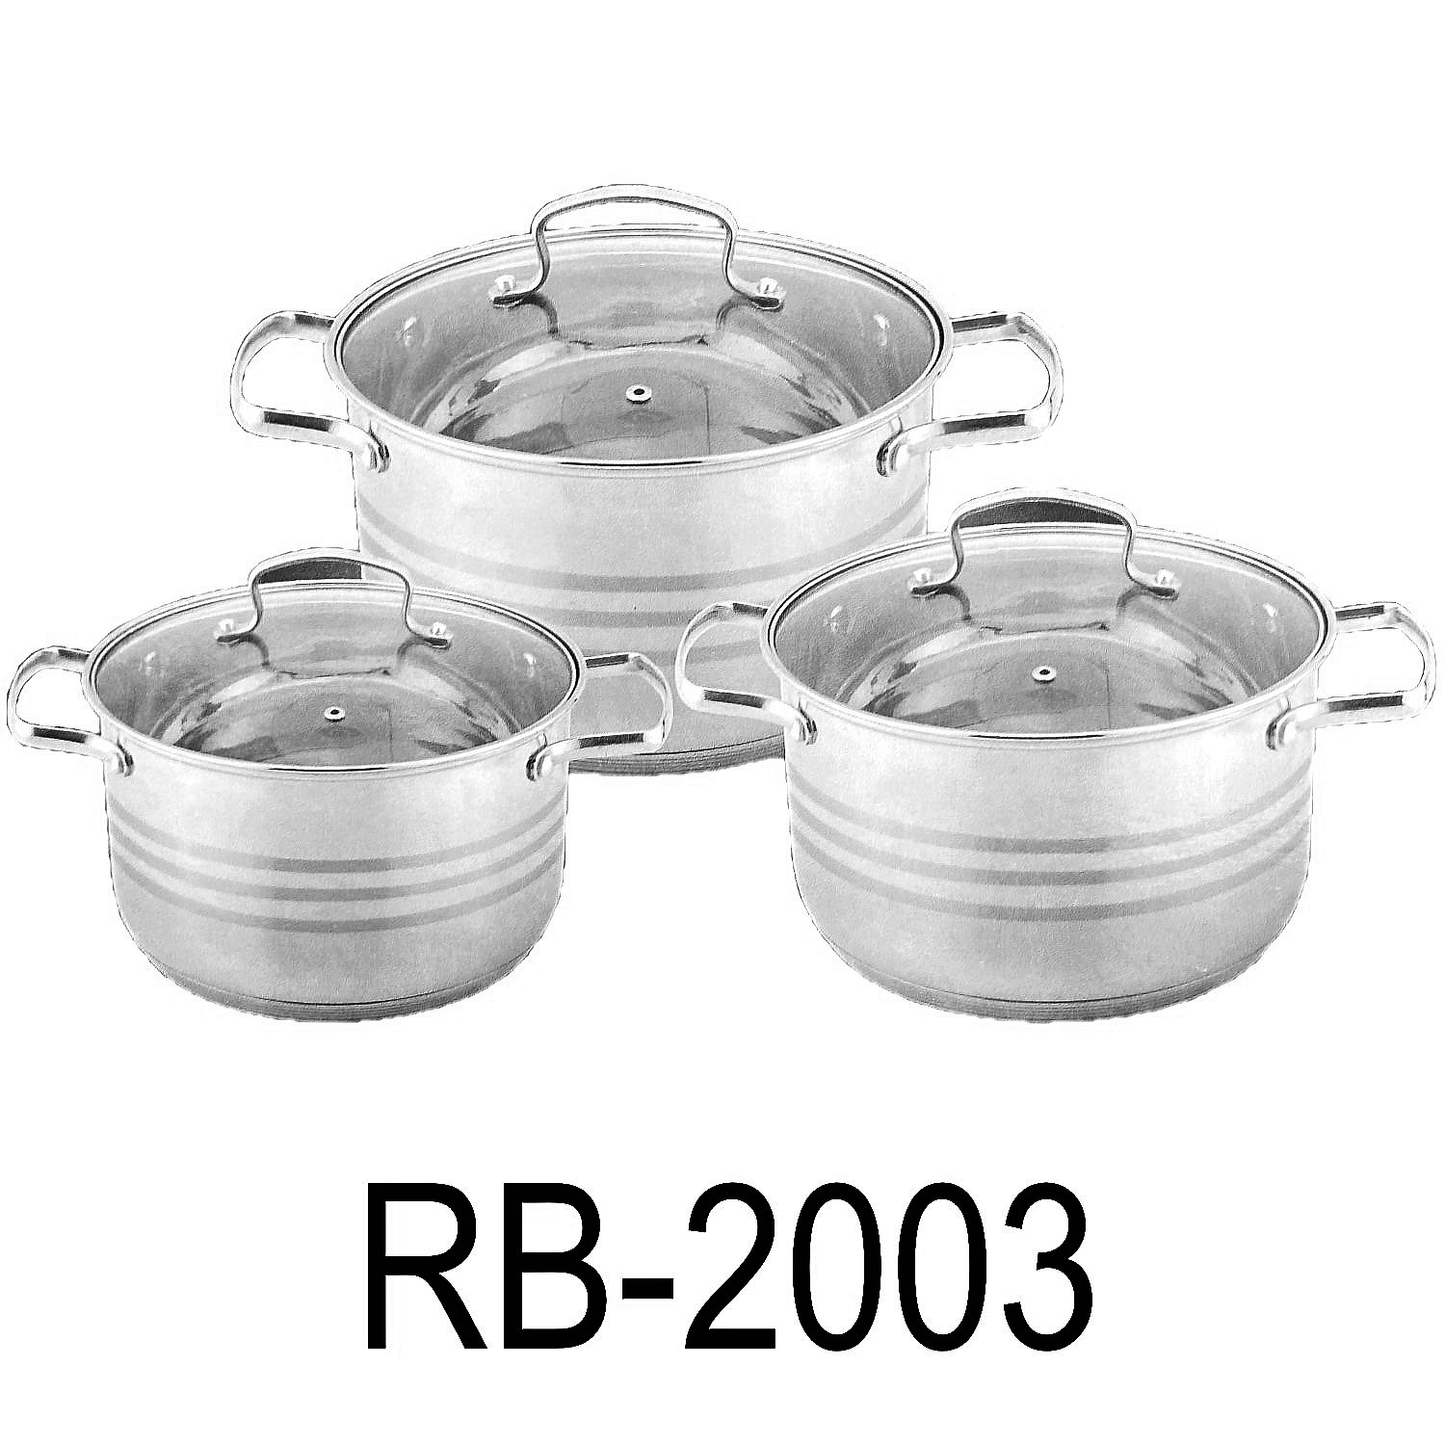 6 PC Stainless Steel Cookware Set